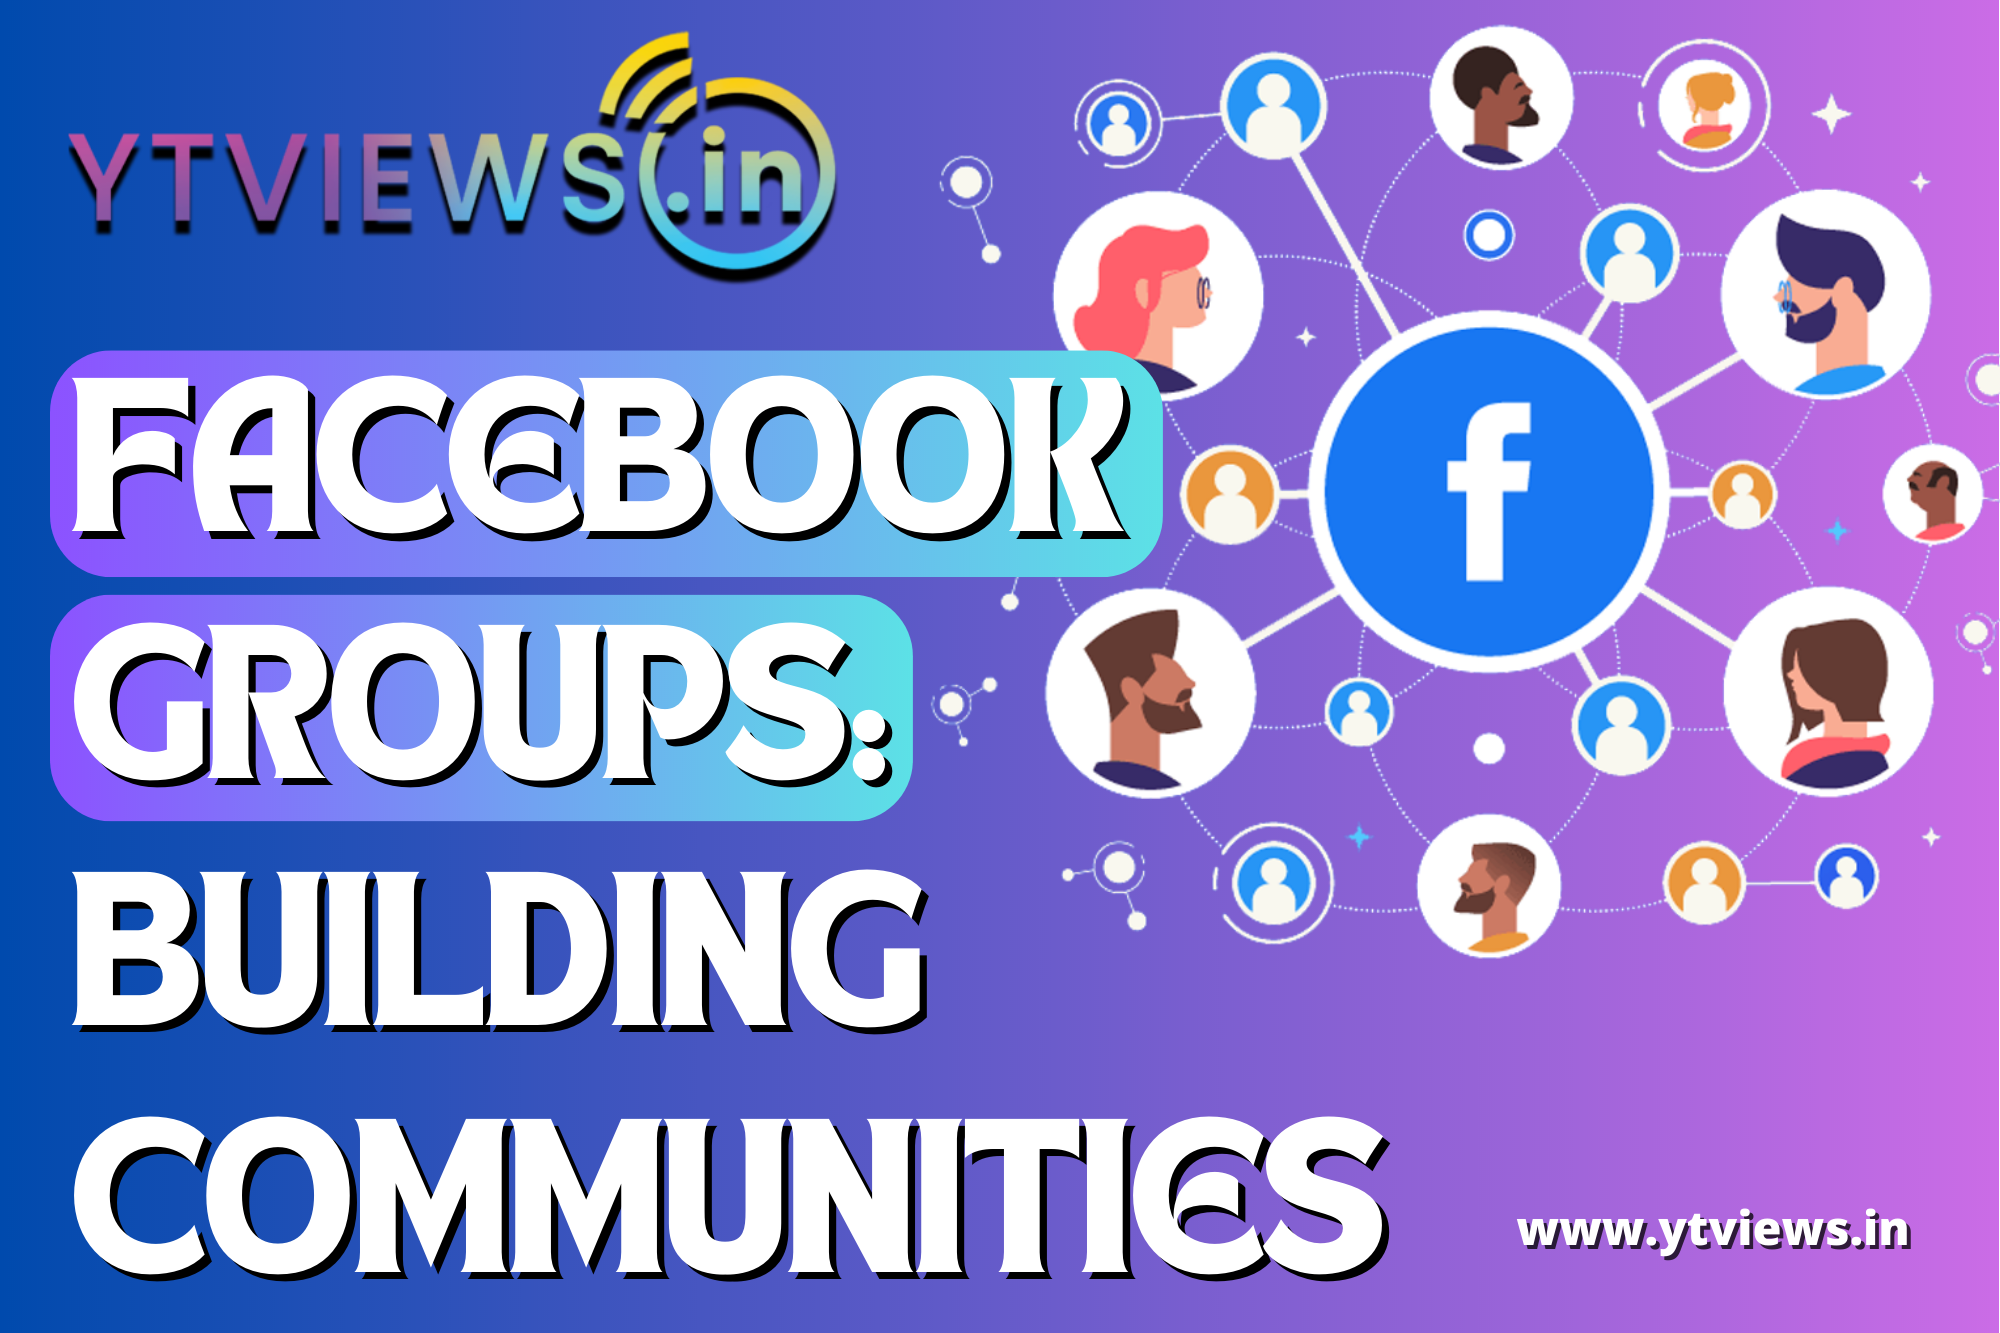 Facebook Groups: Building Communities in a Digital Age